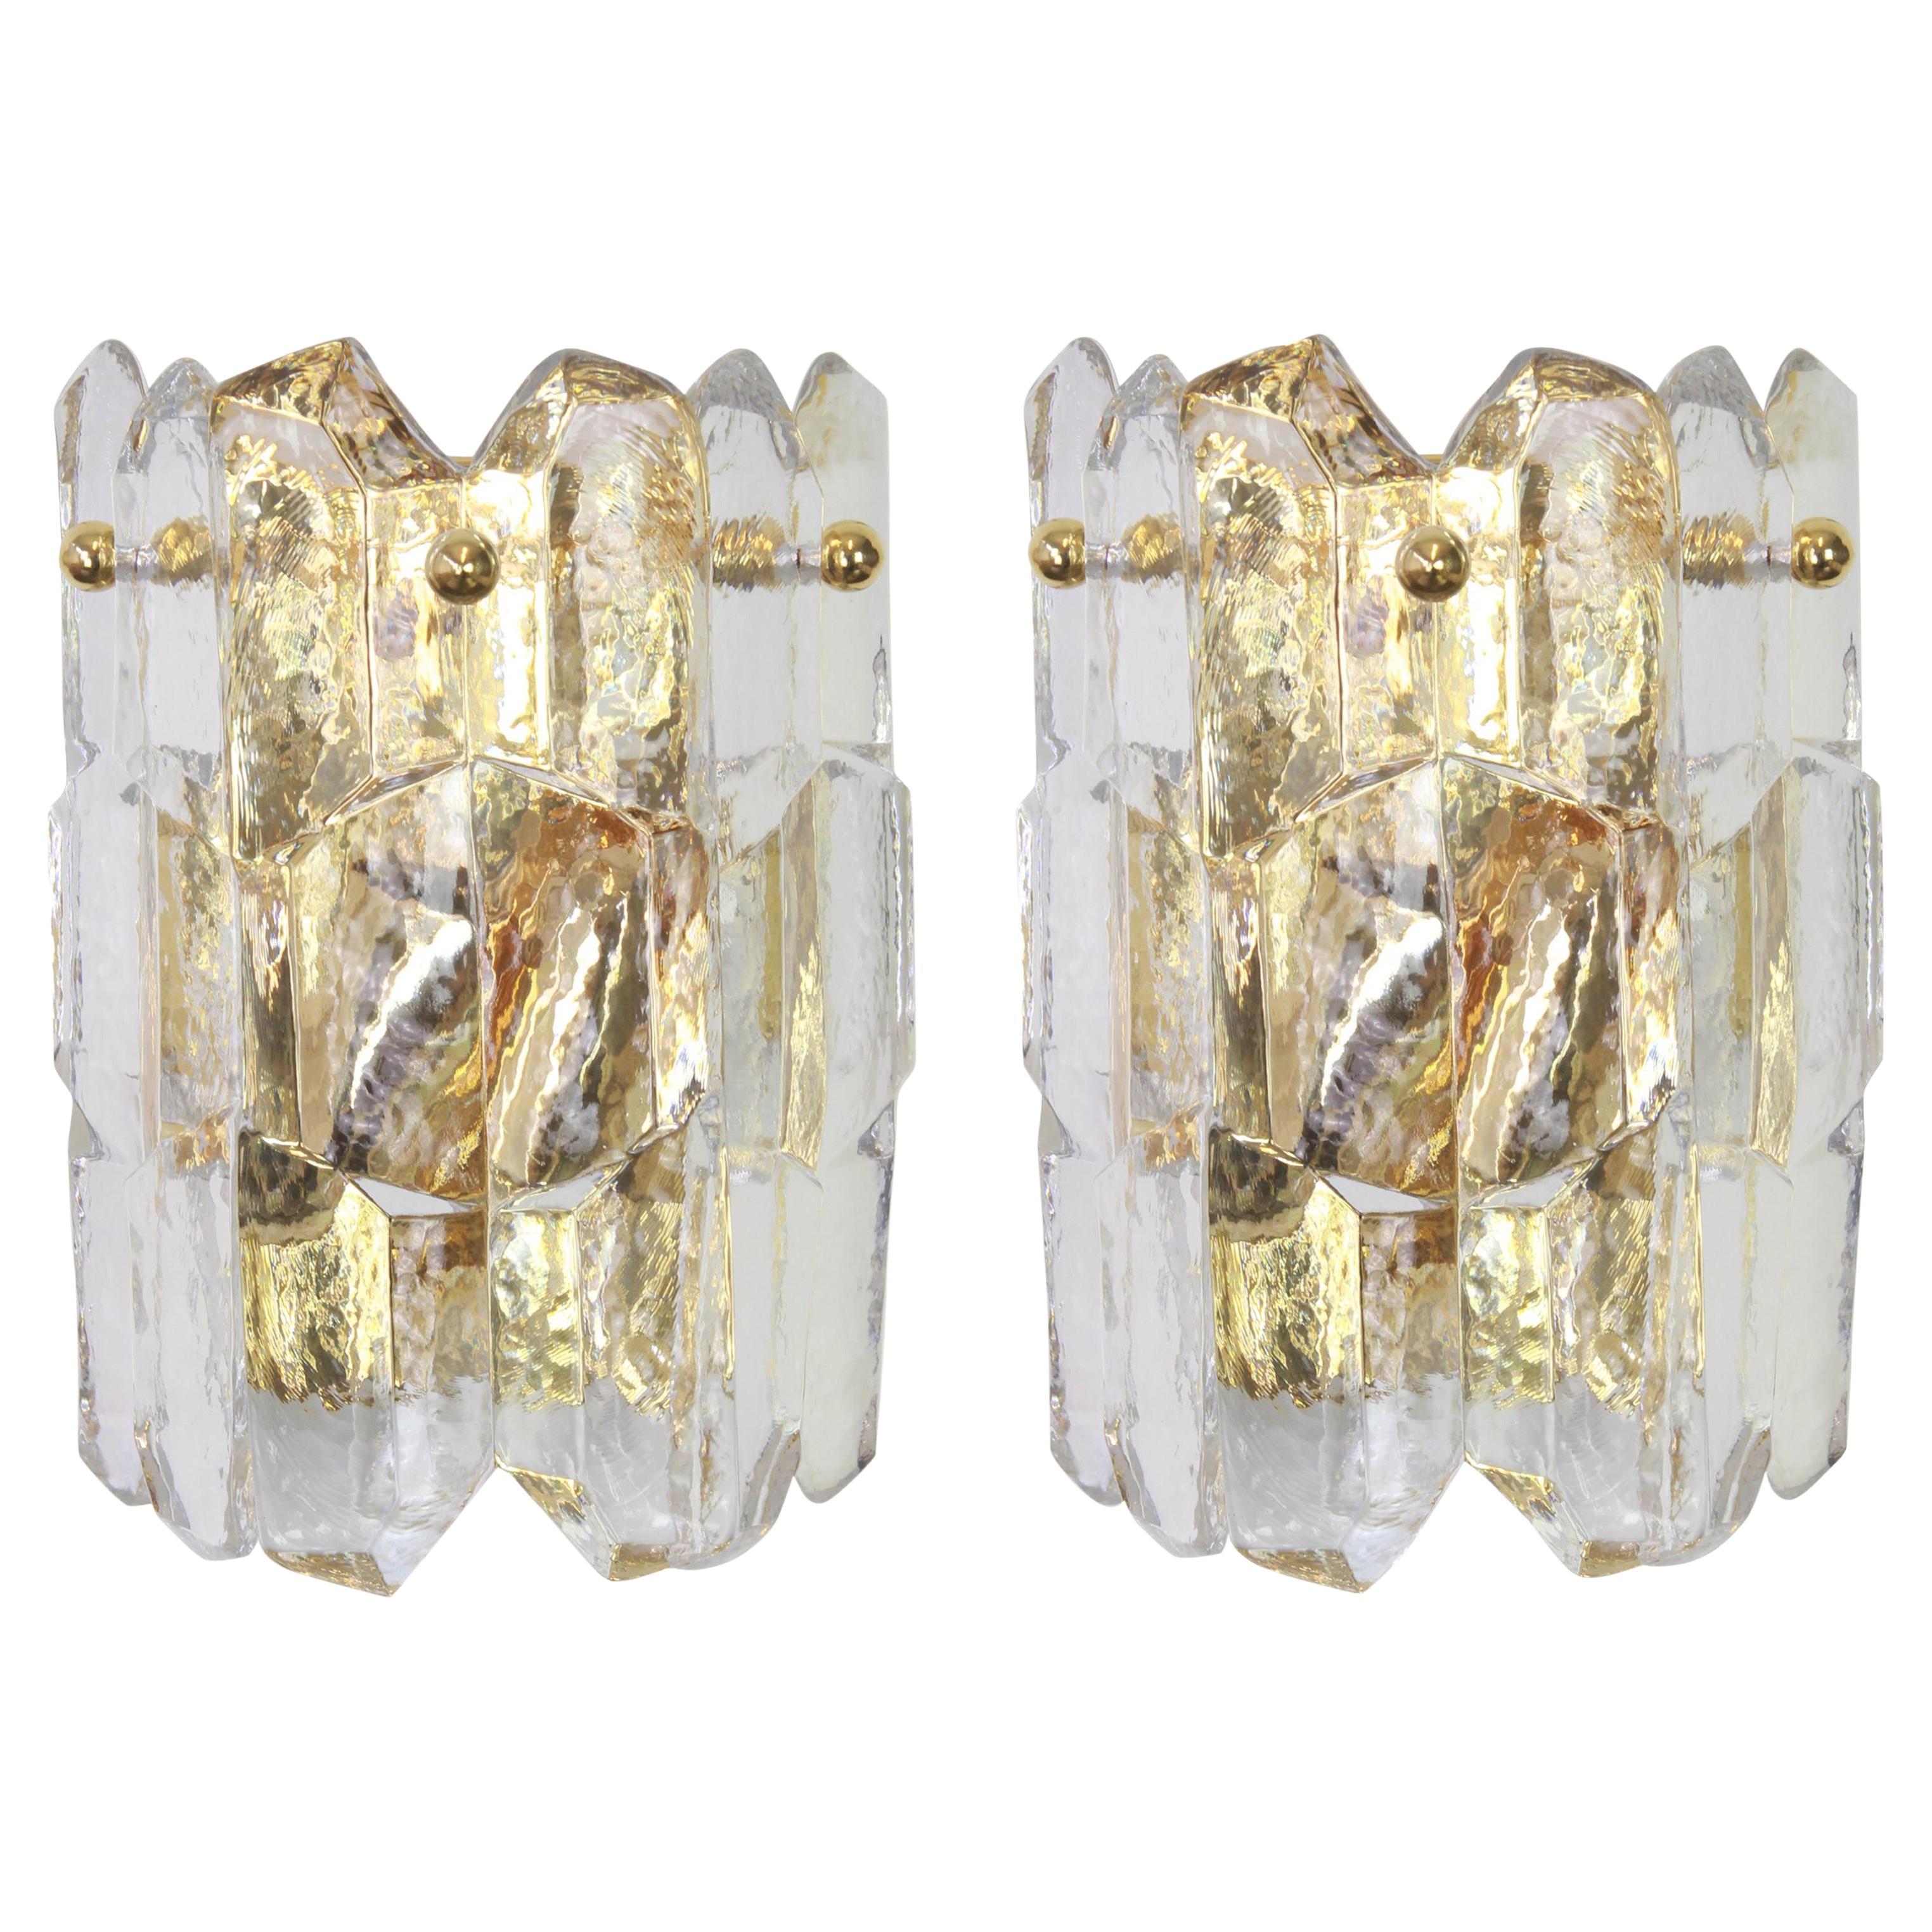 1 of 3 Sets of Kalmar Gilded Sconces Murano Wall Lights Palazzo, Austria, 1970s For Sale